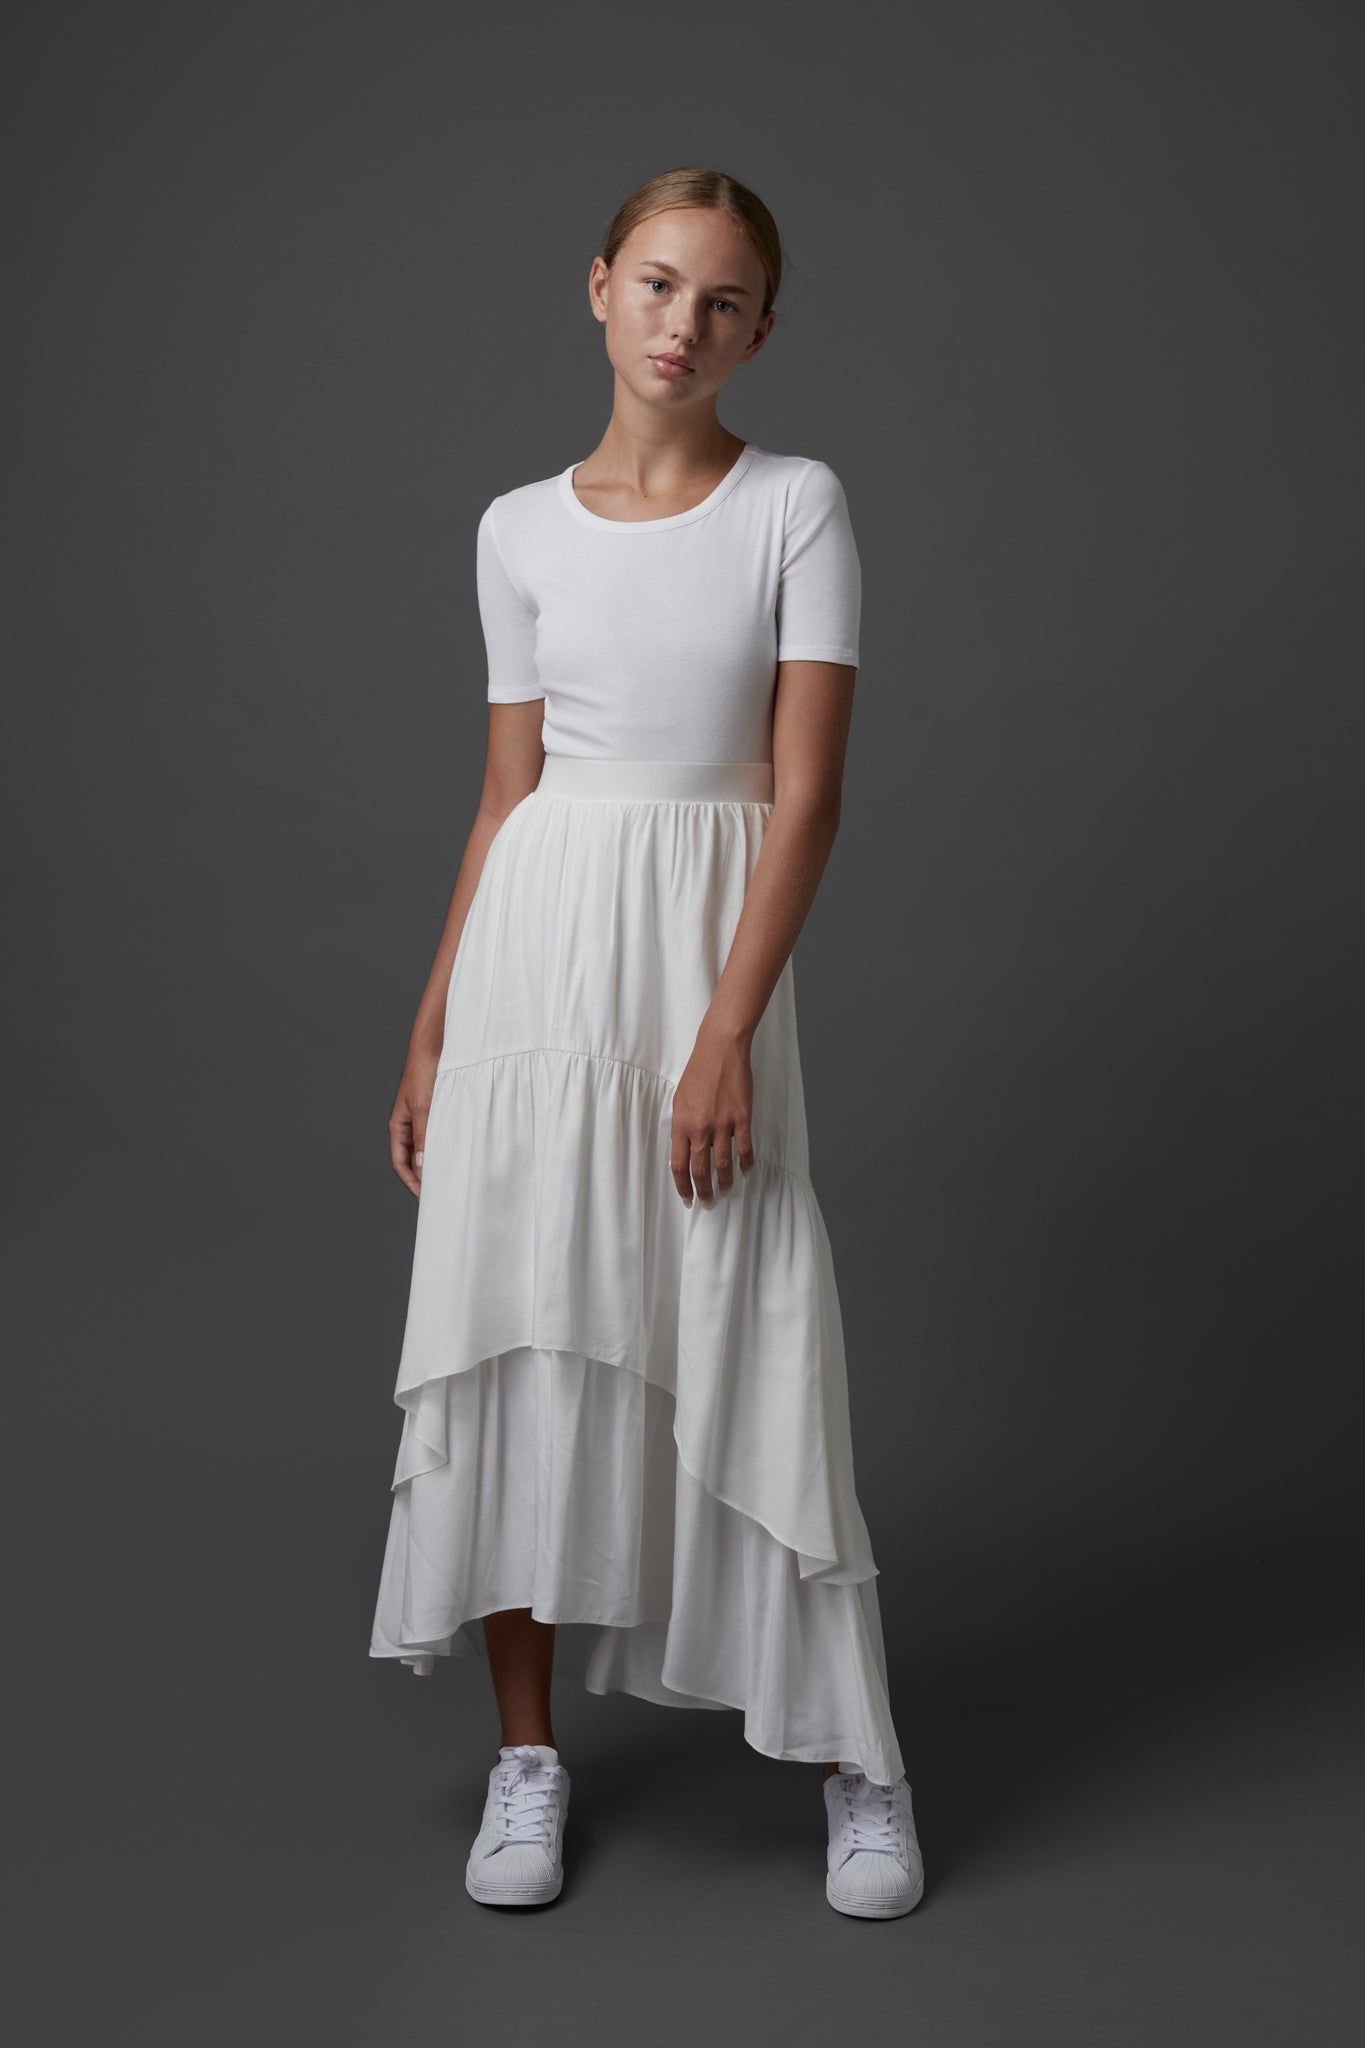 Layered Skirt in White #1633L